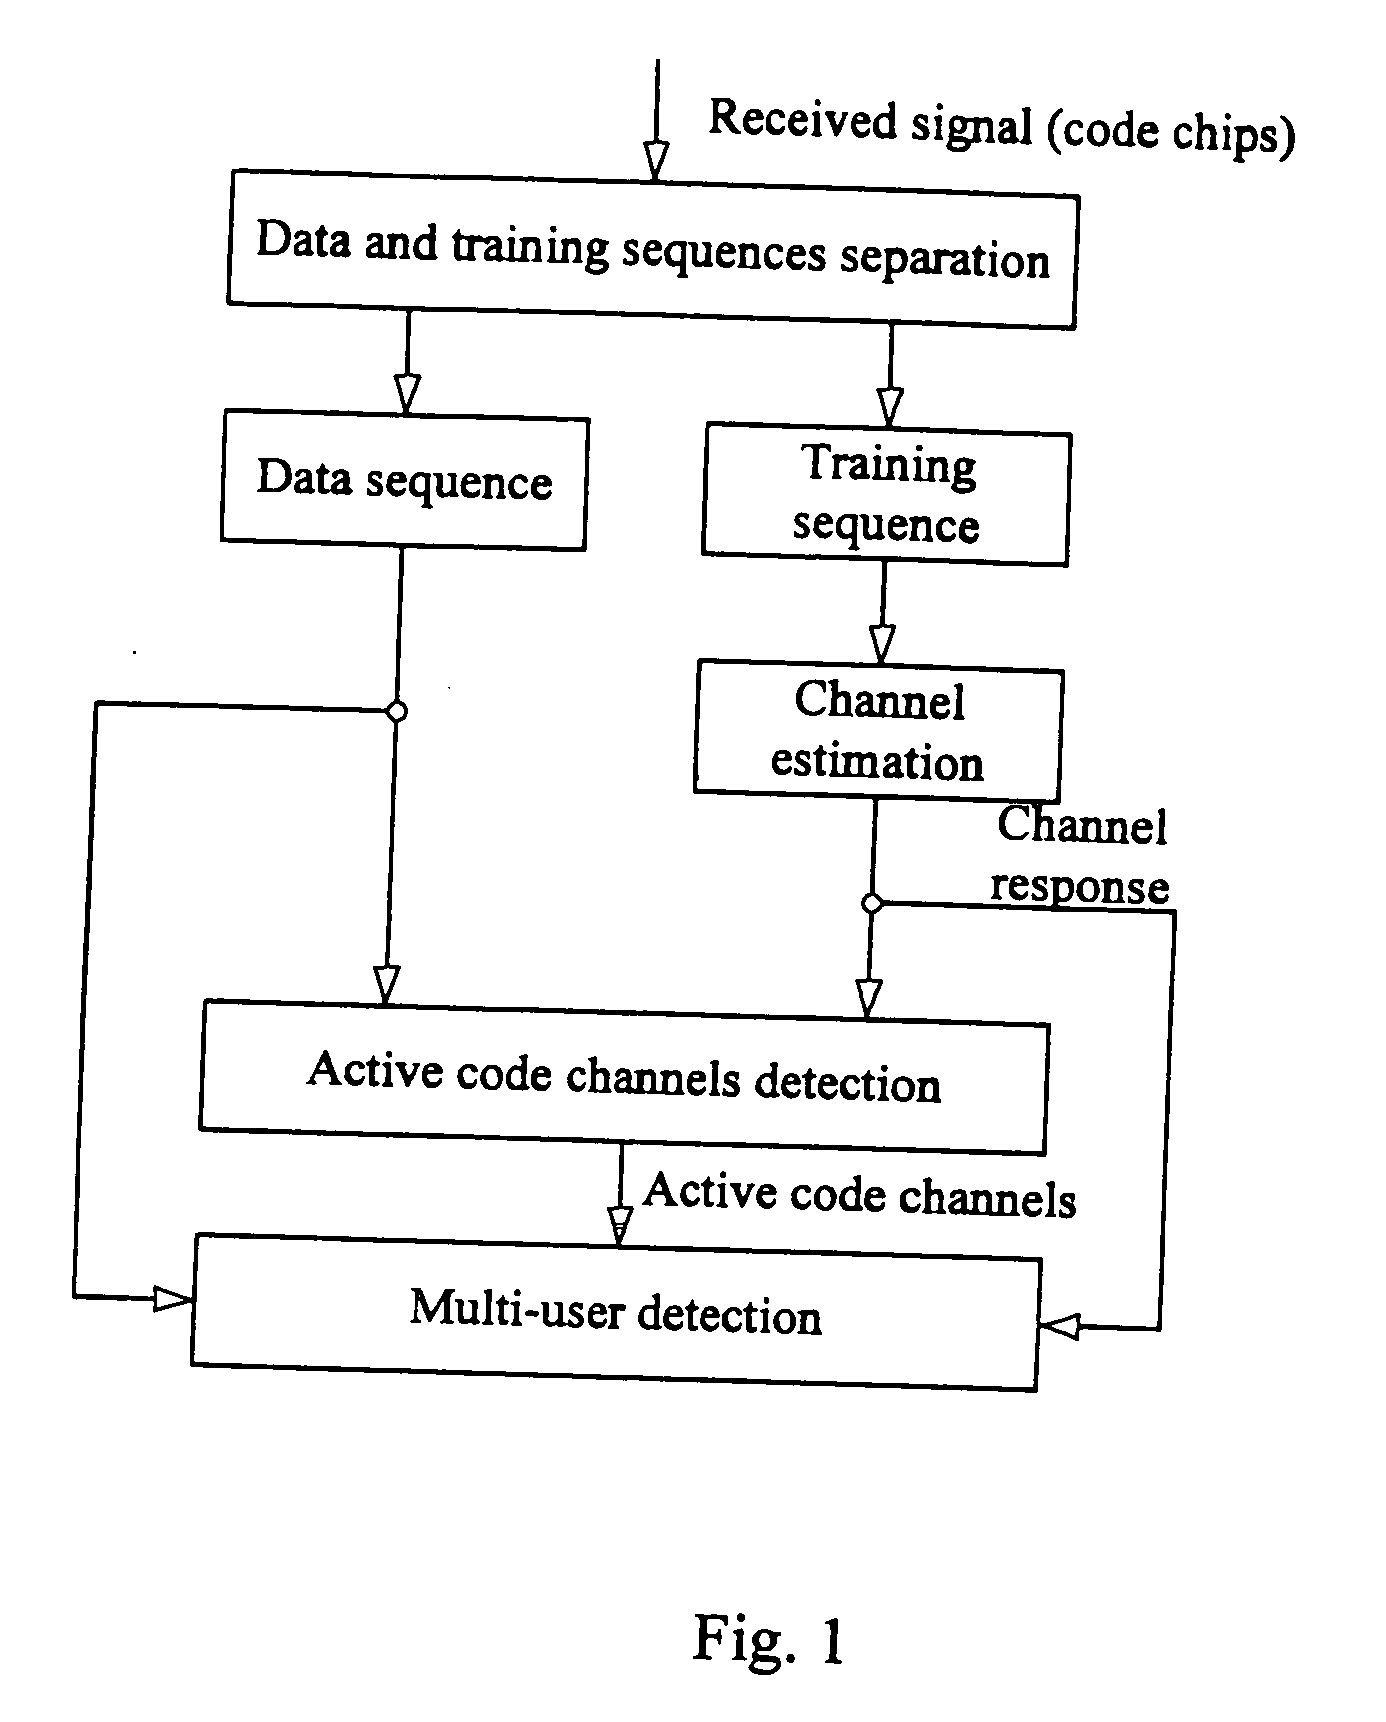 Method and apparatus for multi-user code channel activation detection in wireless communication system